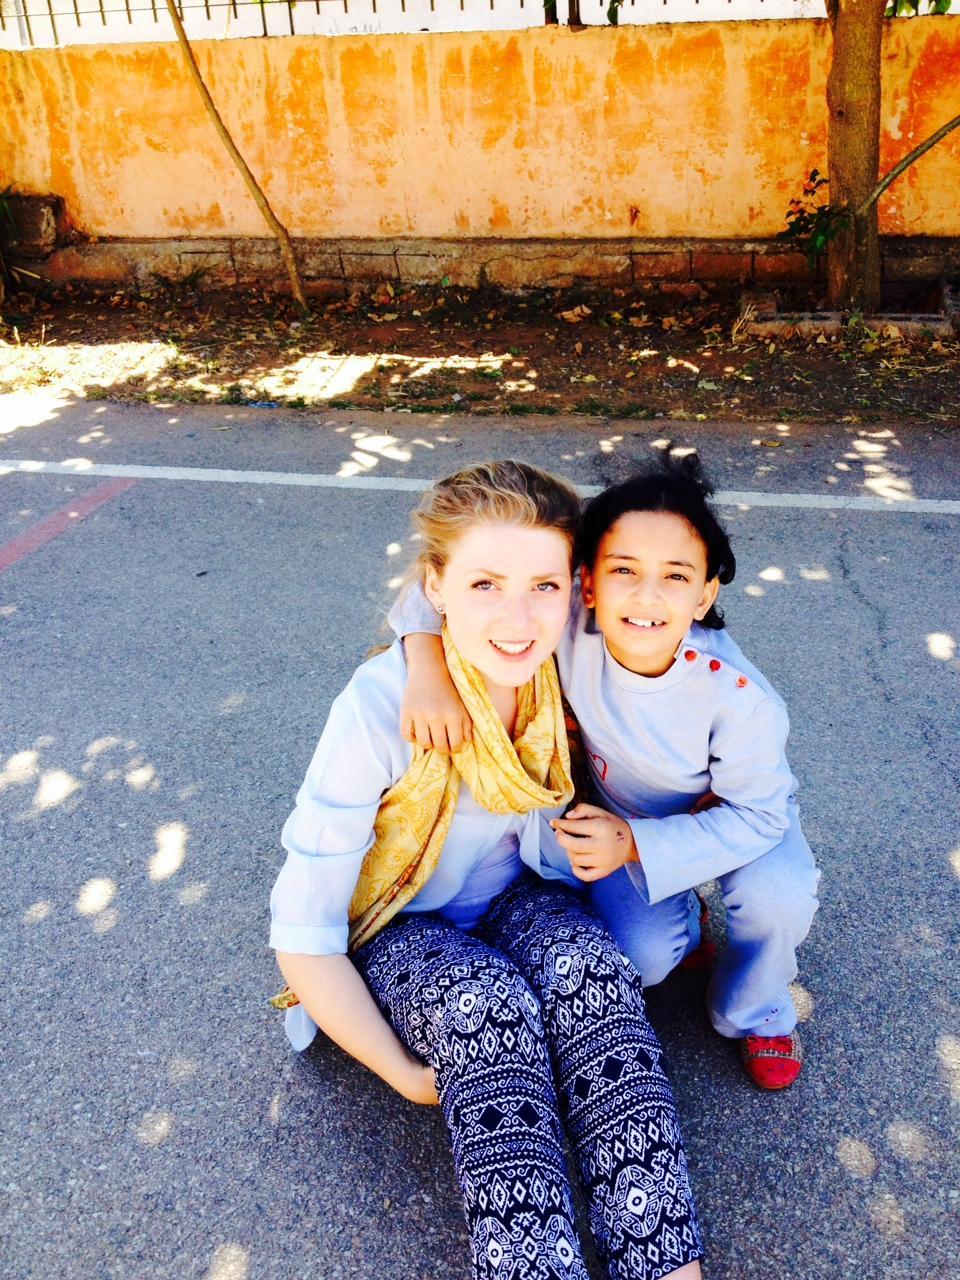 VOLUNTEER STORIES AMESIP CARE and SPORTS CENTER Lydia Thurlow from UK I've simply had the best 2 months in Morocco. My whole experience was just utterly overwhelming.